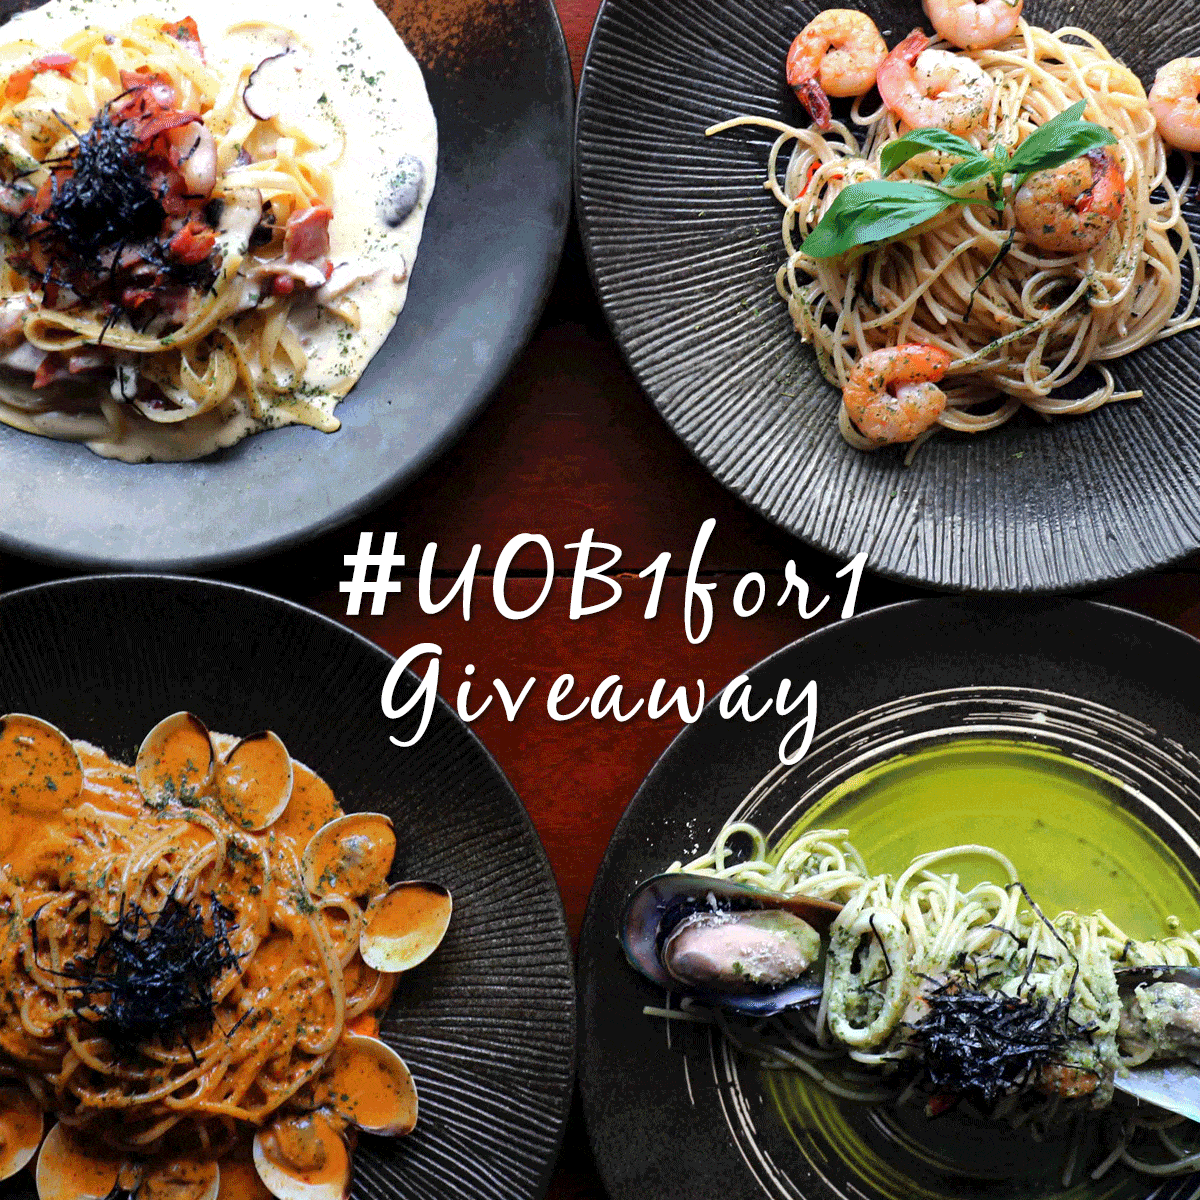 UOB Singapore 1-for-1 Giveaway Stand to Win $50 Dining Vouchers Promotion ends 15 Sep 2016